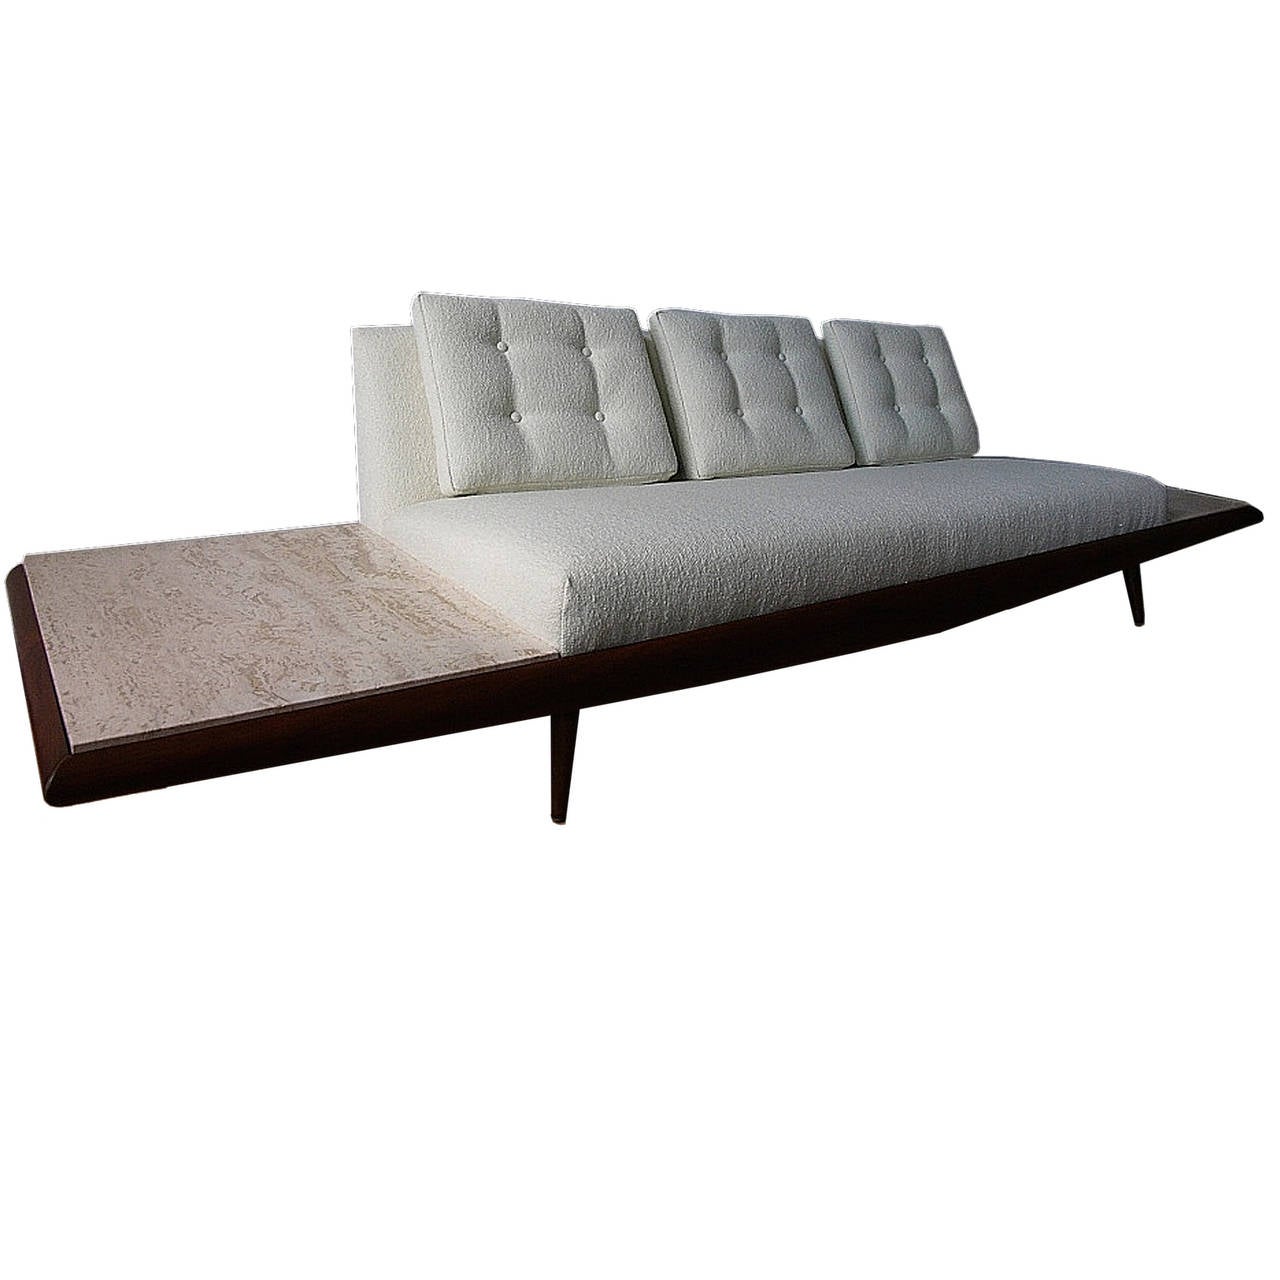 American Adrian Pearsall Sofa with Travertine End Table Inserts